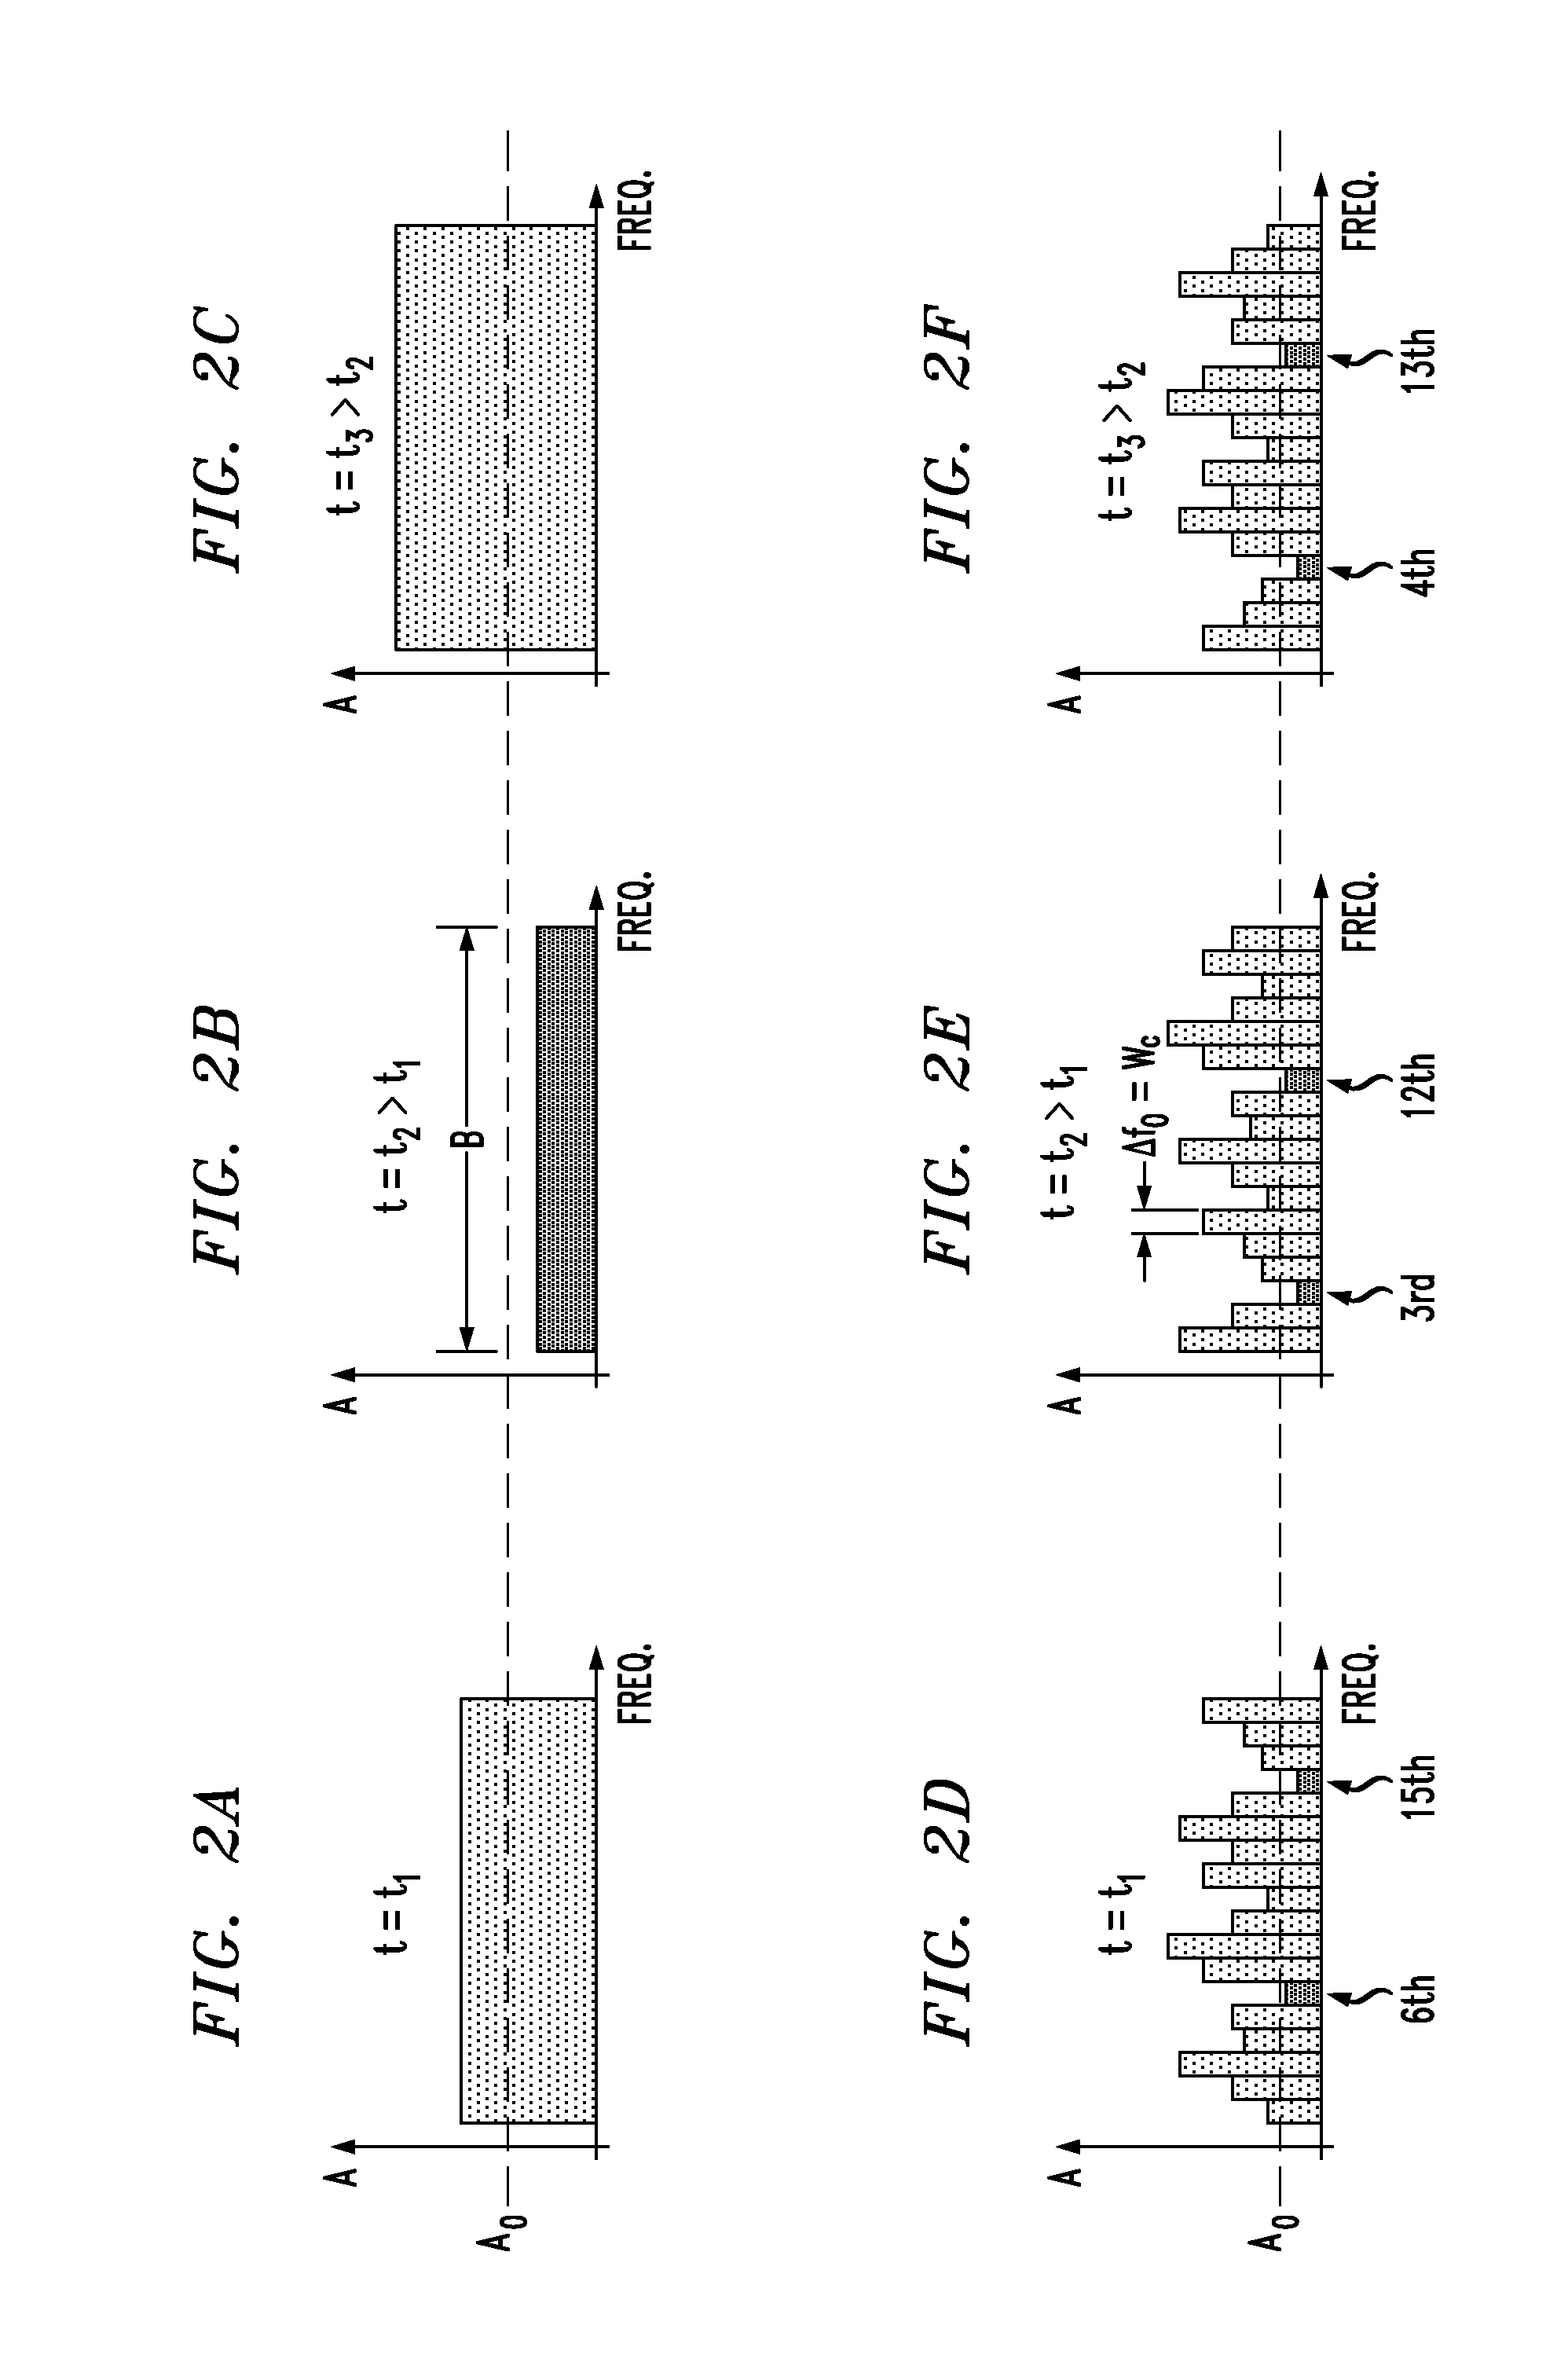 Multipath channel for optical subcarrier modulation